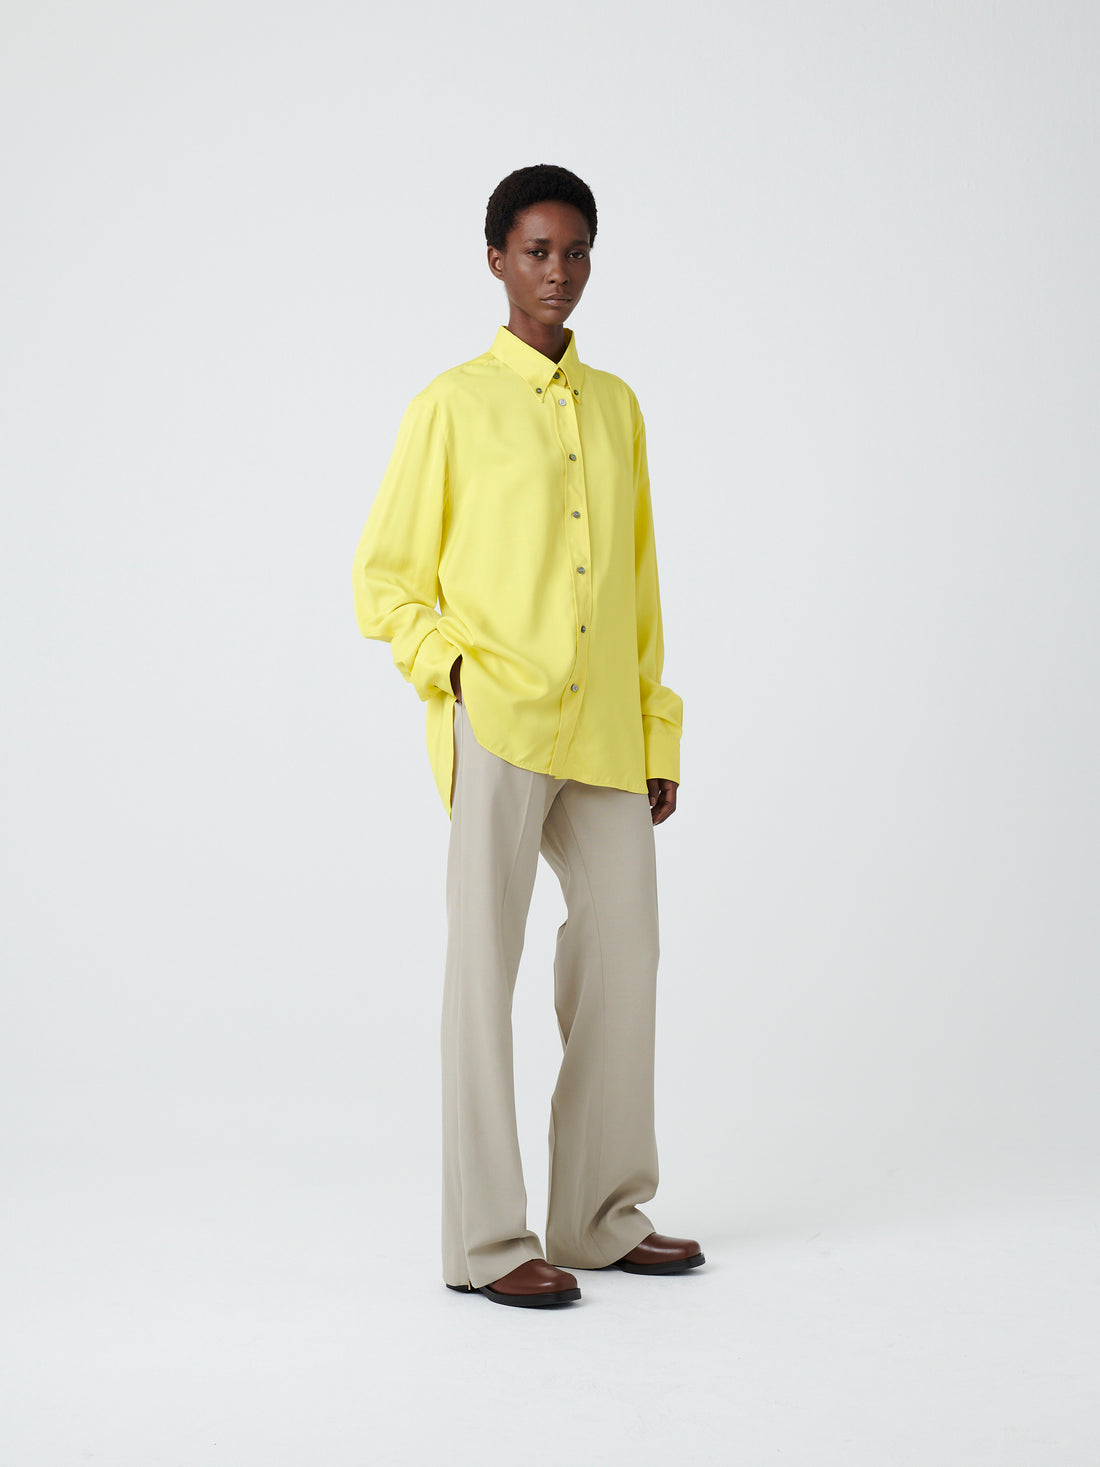 Quince Pant in Lemon